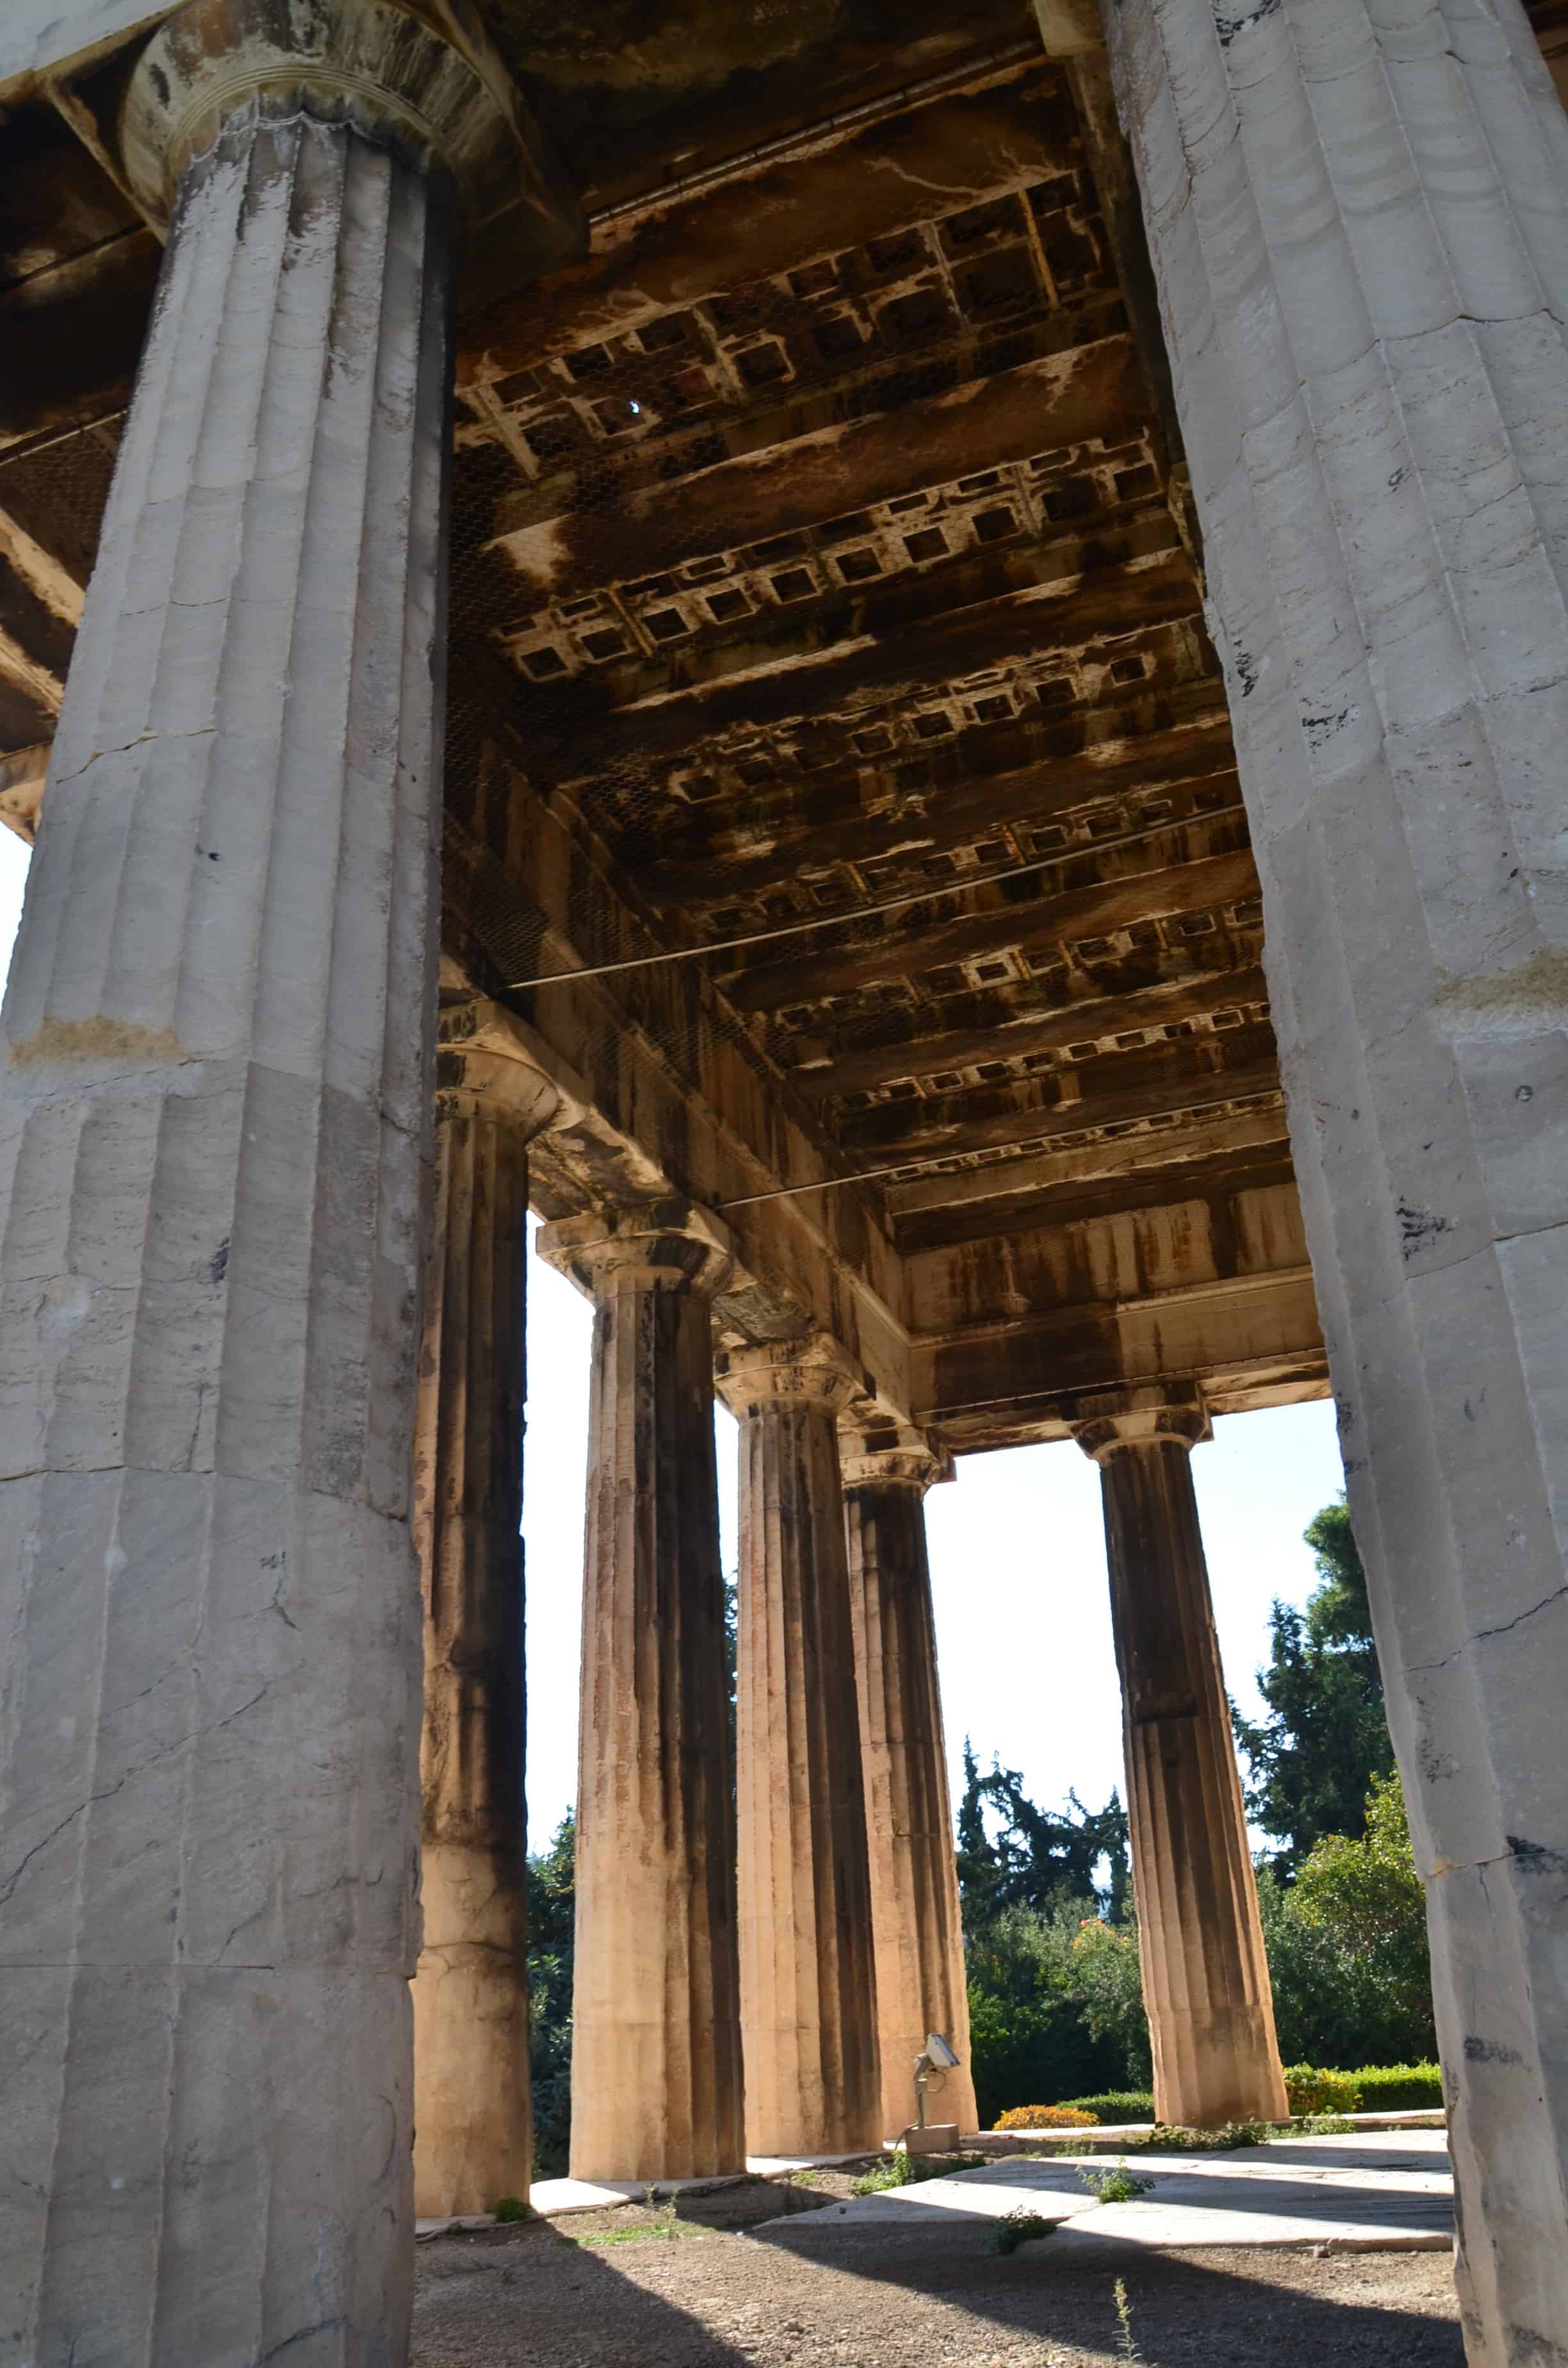 West peristyle of the Temple of Hephaestus at the Agora in Athens, Greece